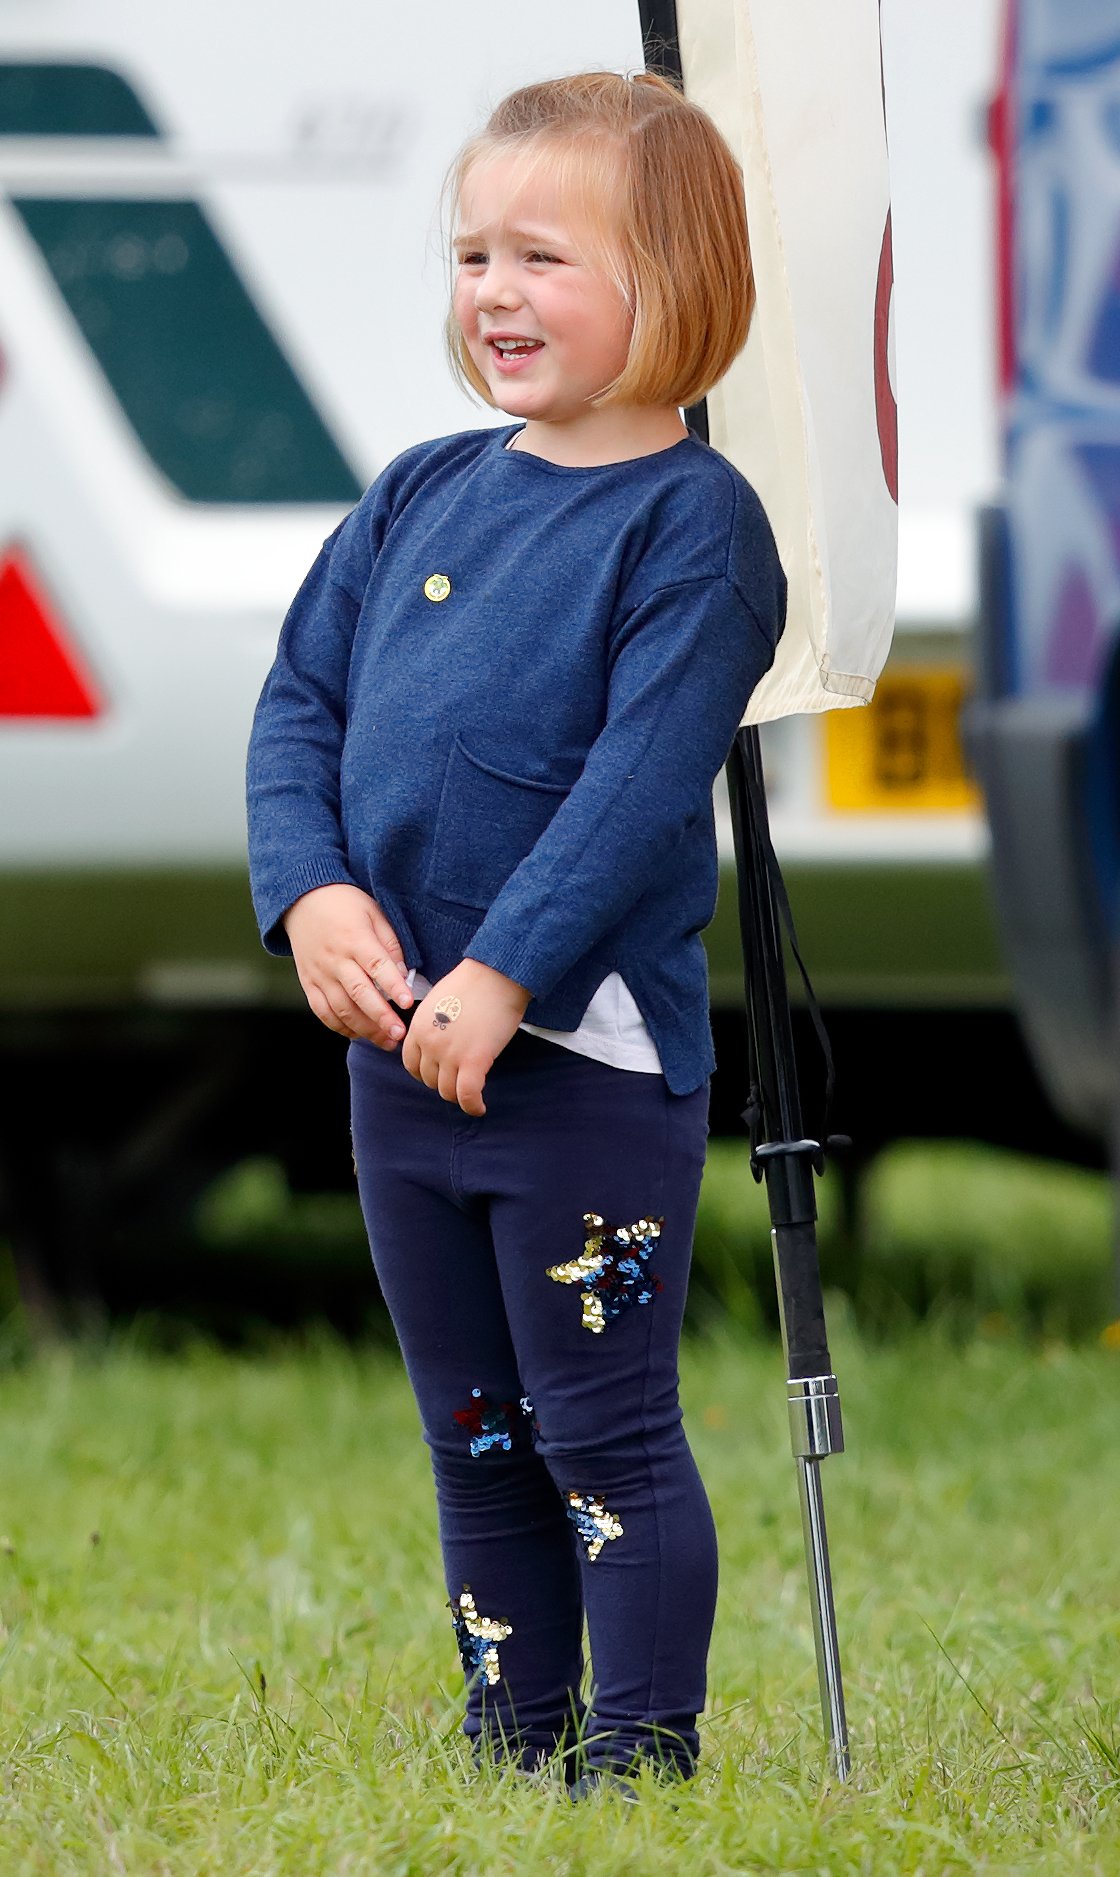 Image de Mia Tindall : Getty Images.